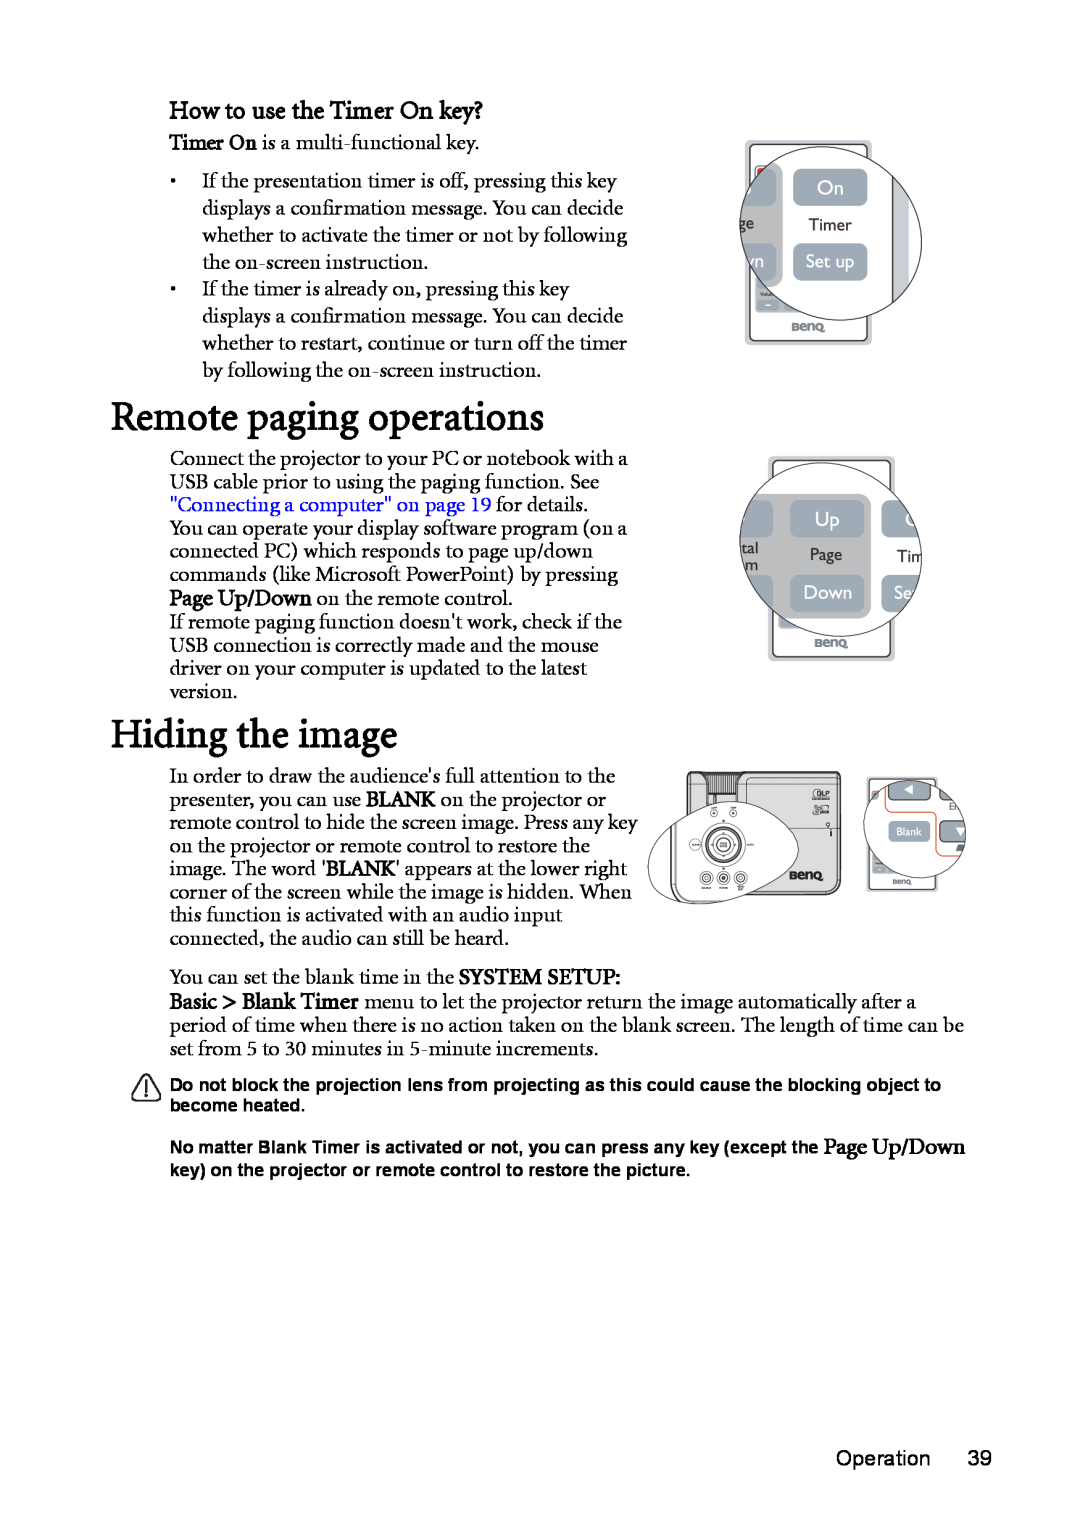 BenQ MP625P user manual Remote paging operations, Hiding the image, How to use the Timer On key? 